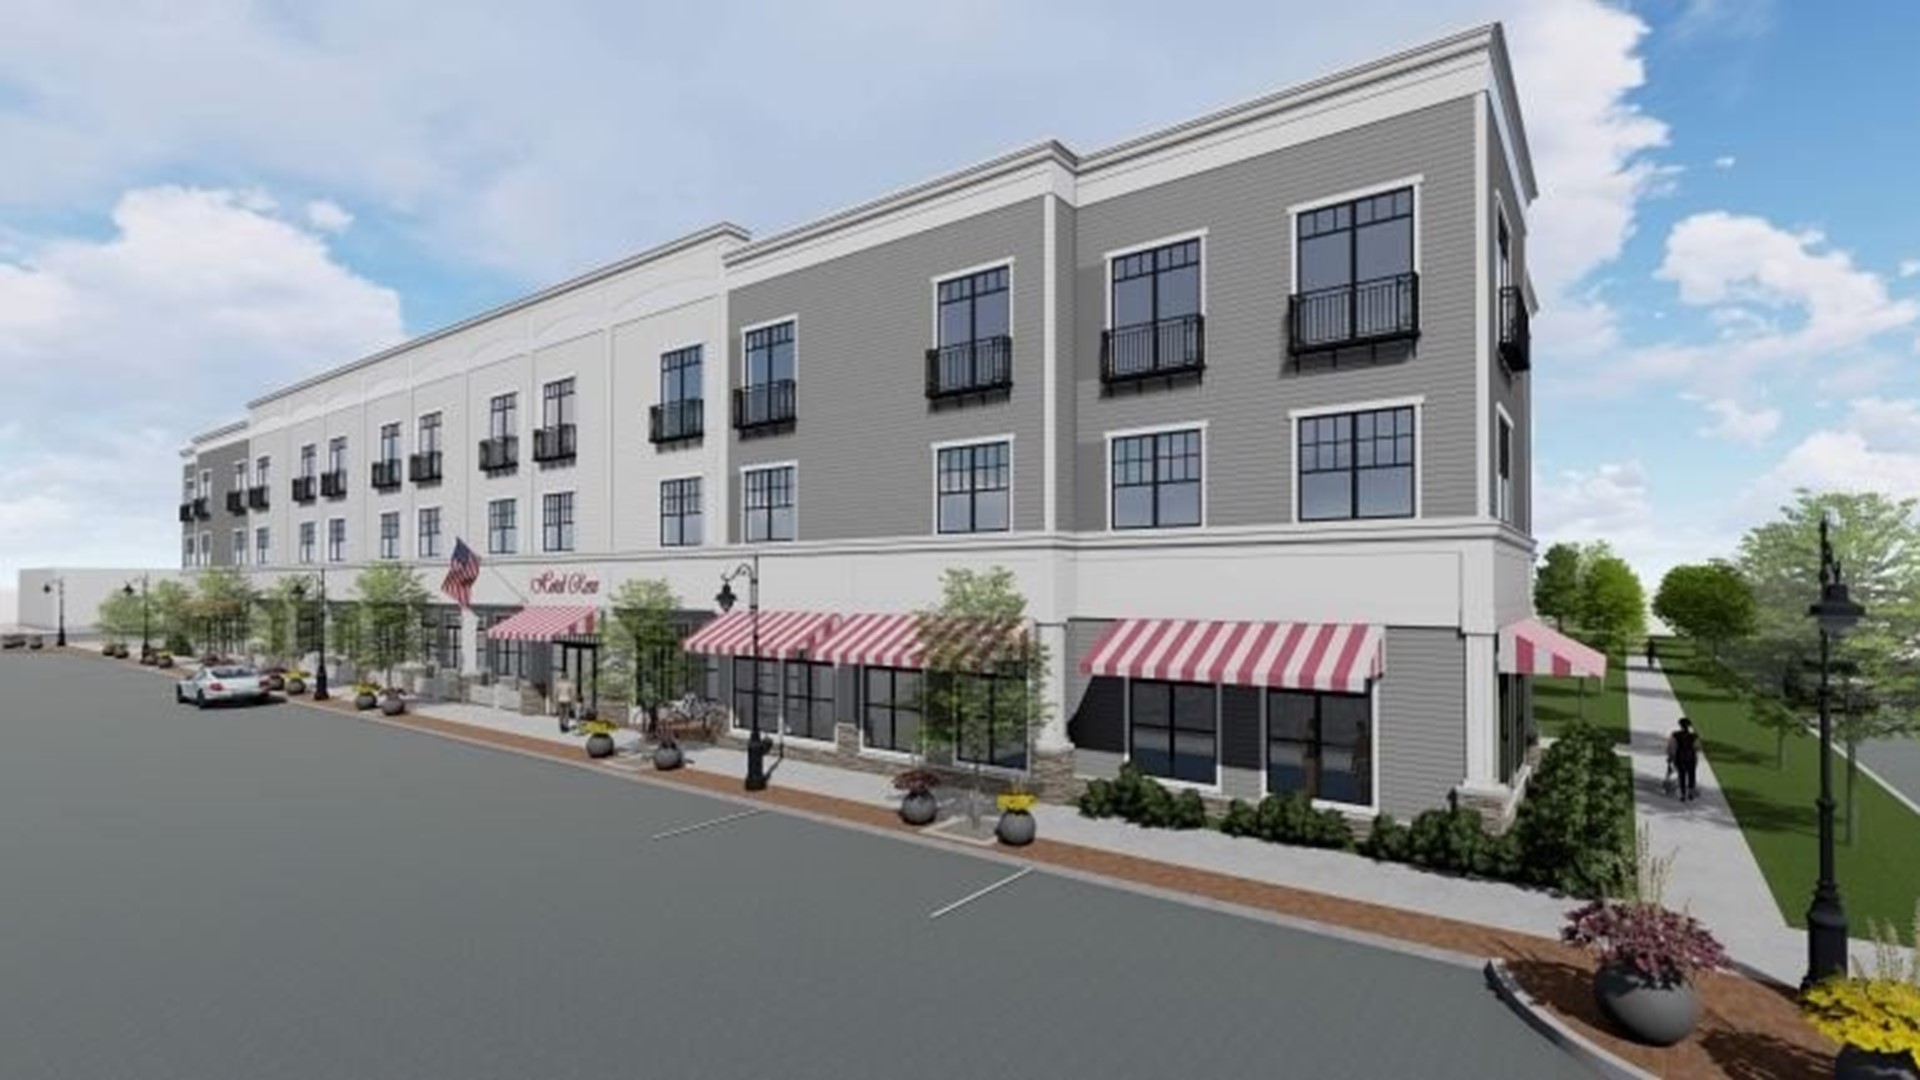 Orion Real Estate Solutions announced Tuesday morning that a new boutique hotel will be built downtown Rockford. The project is expected to start early 2020 and will be completed and open sometimes in 2021.